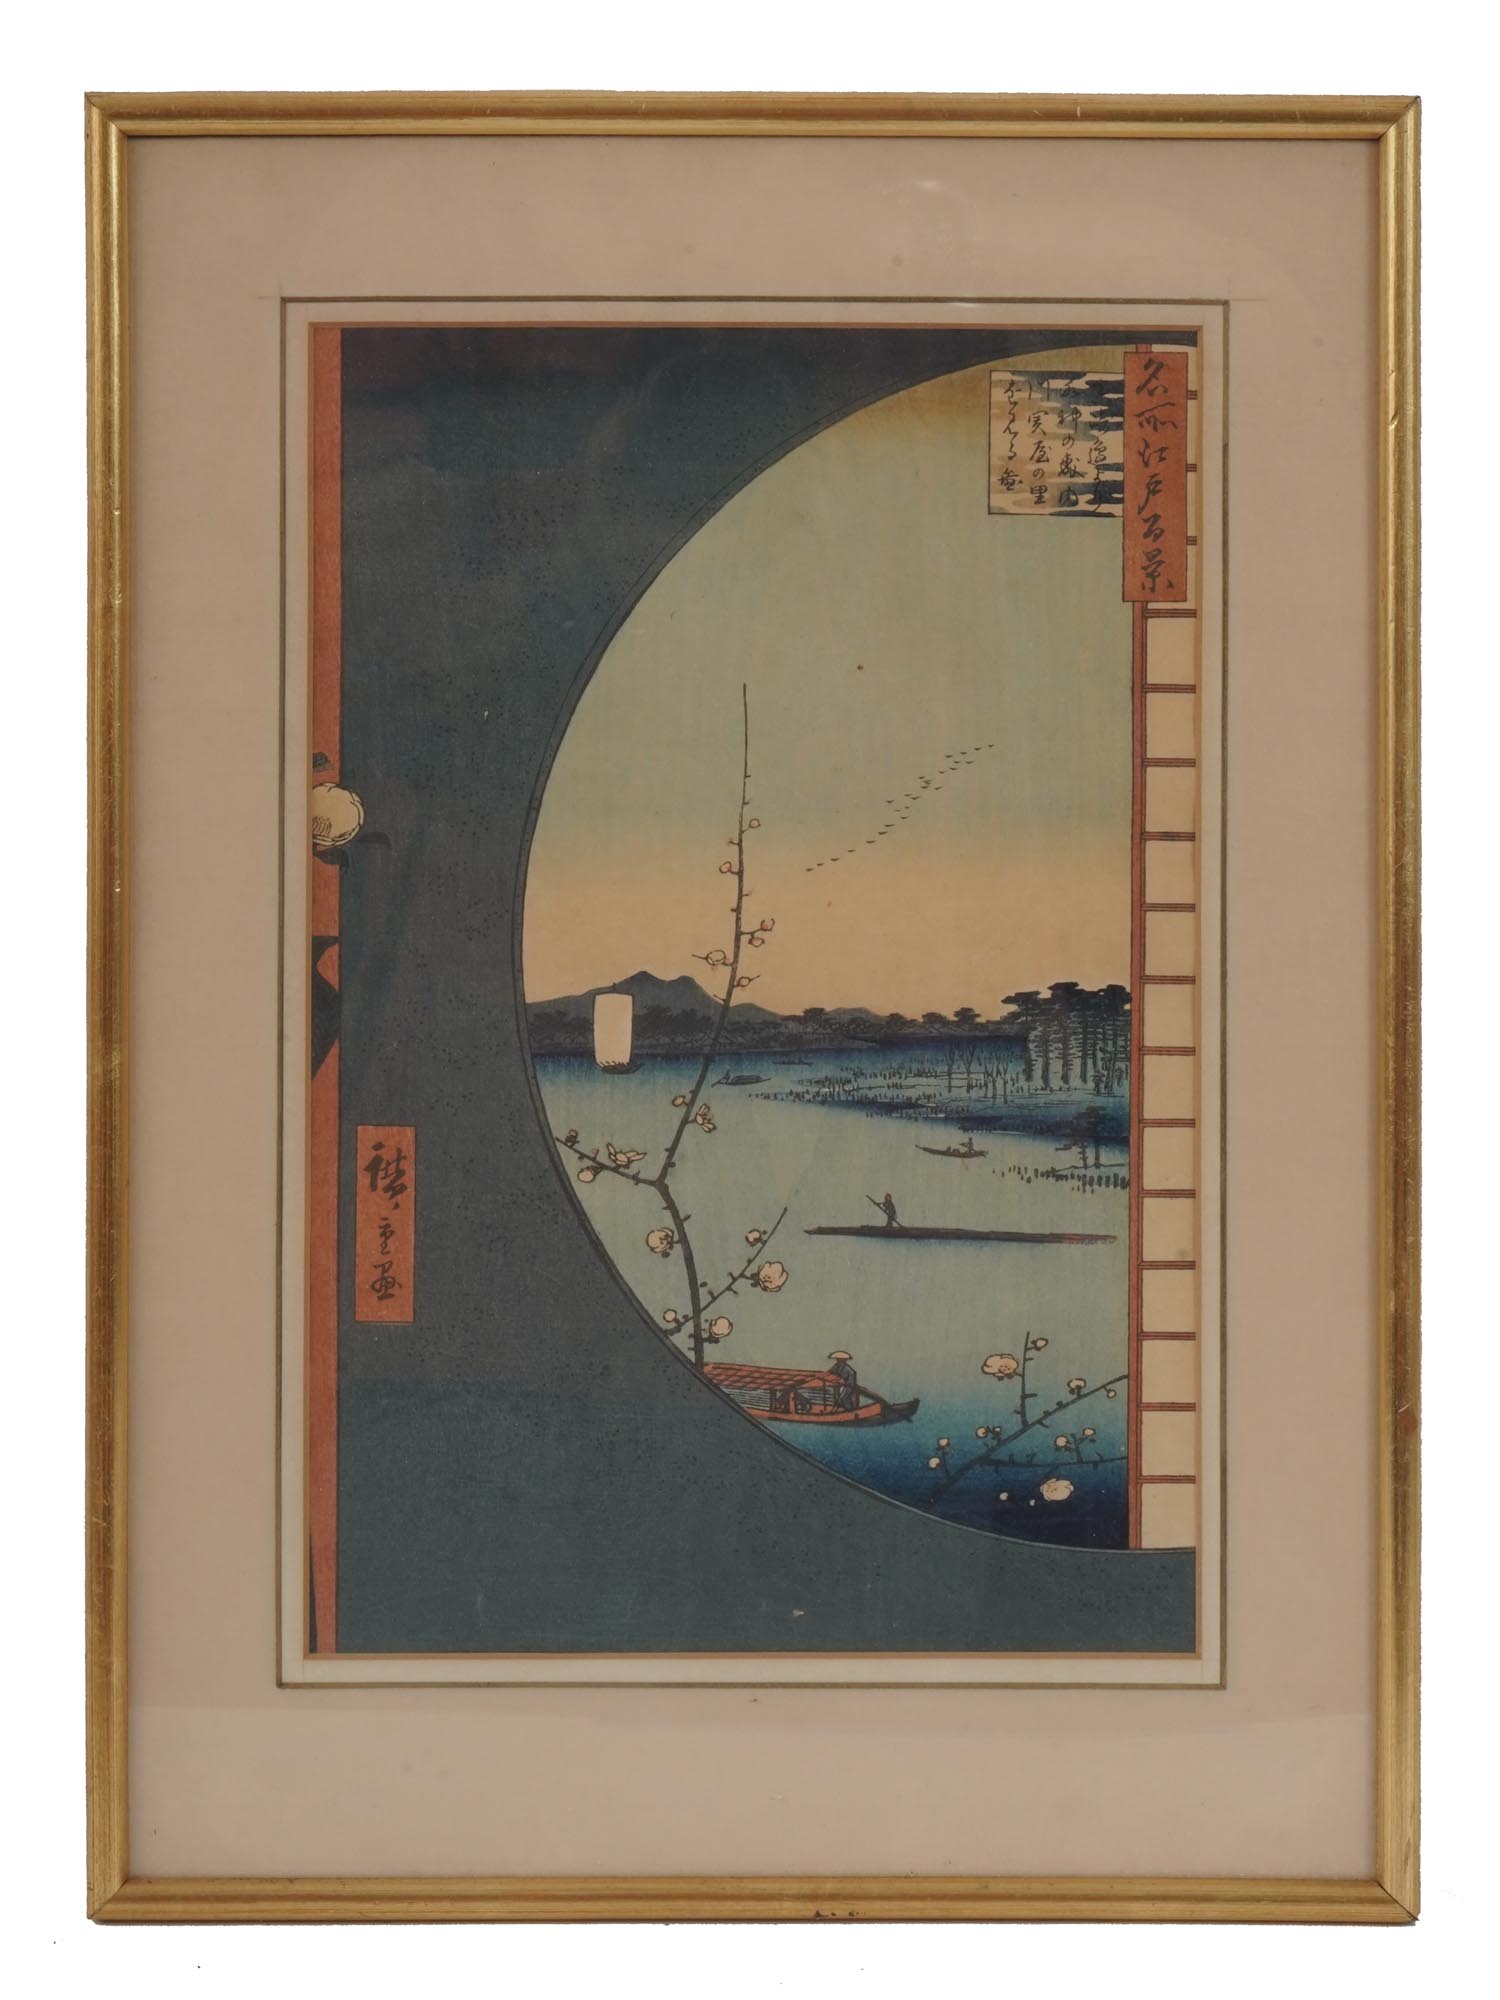 RIVER LANDSCAPE JAPANESE WOODBLOCK BY HIROSHIGE